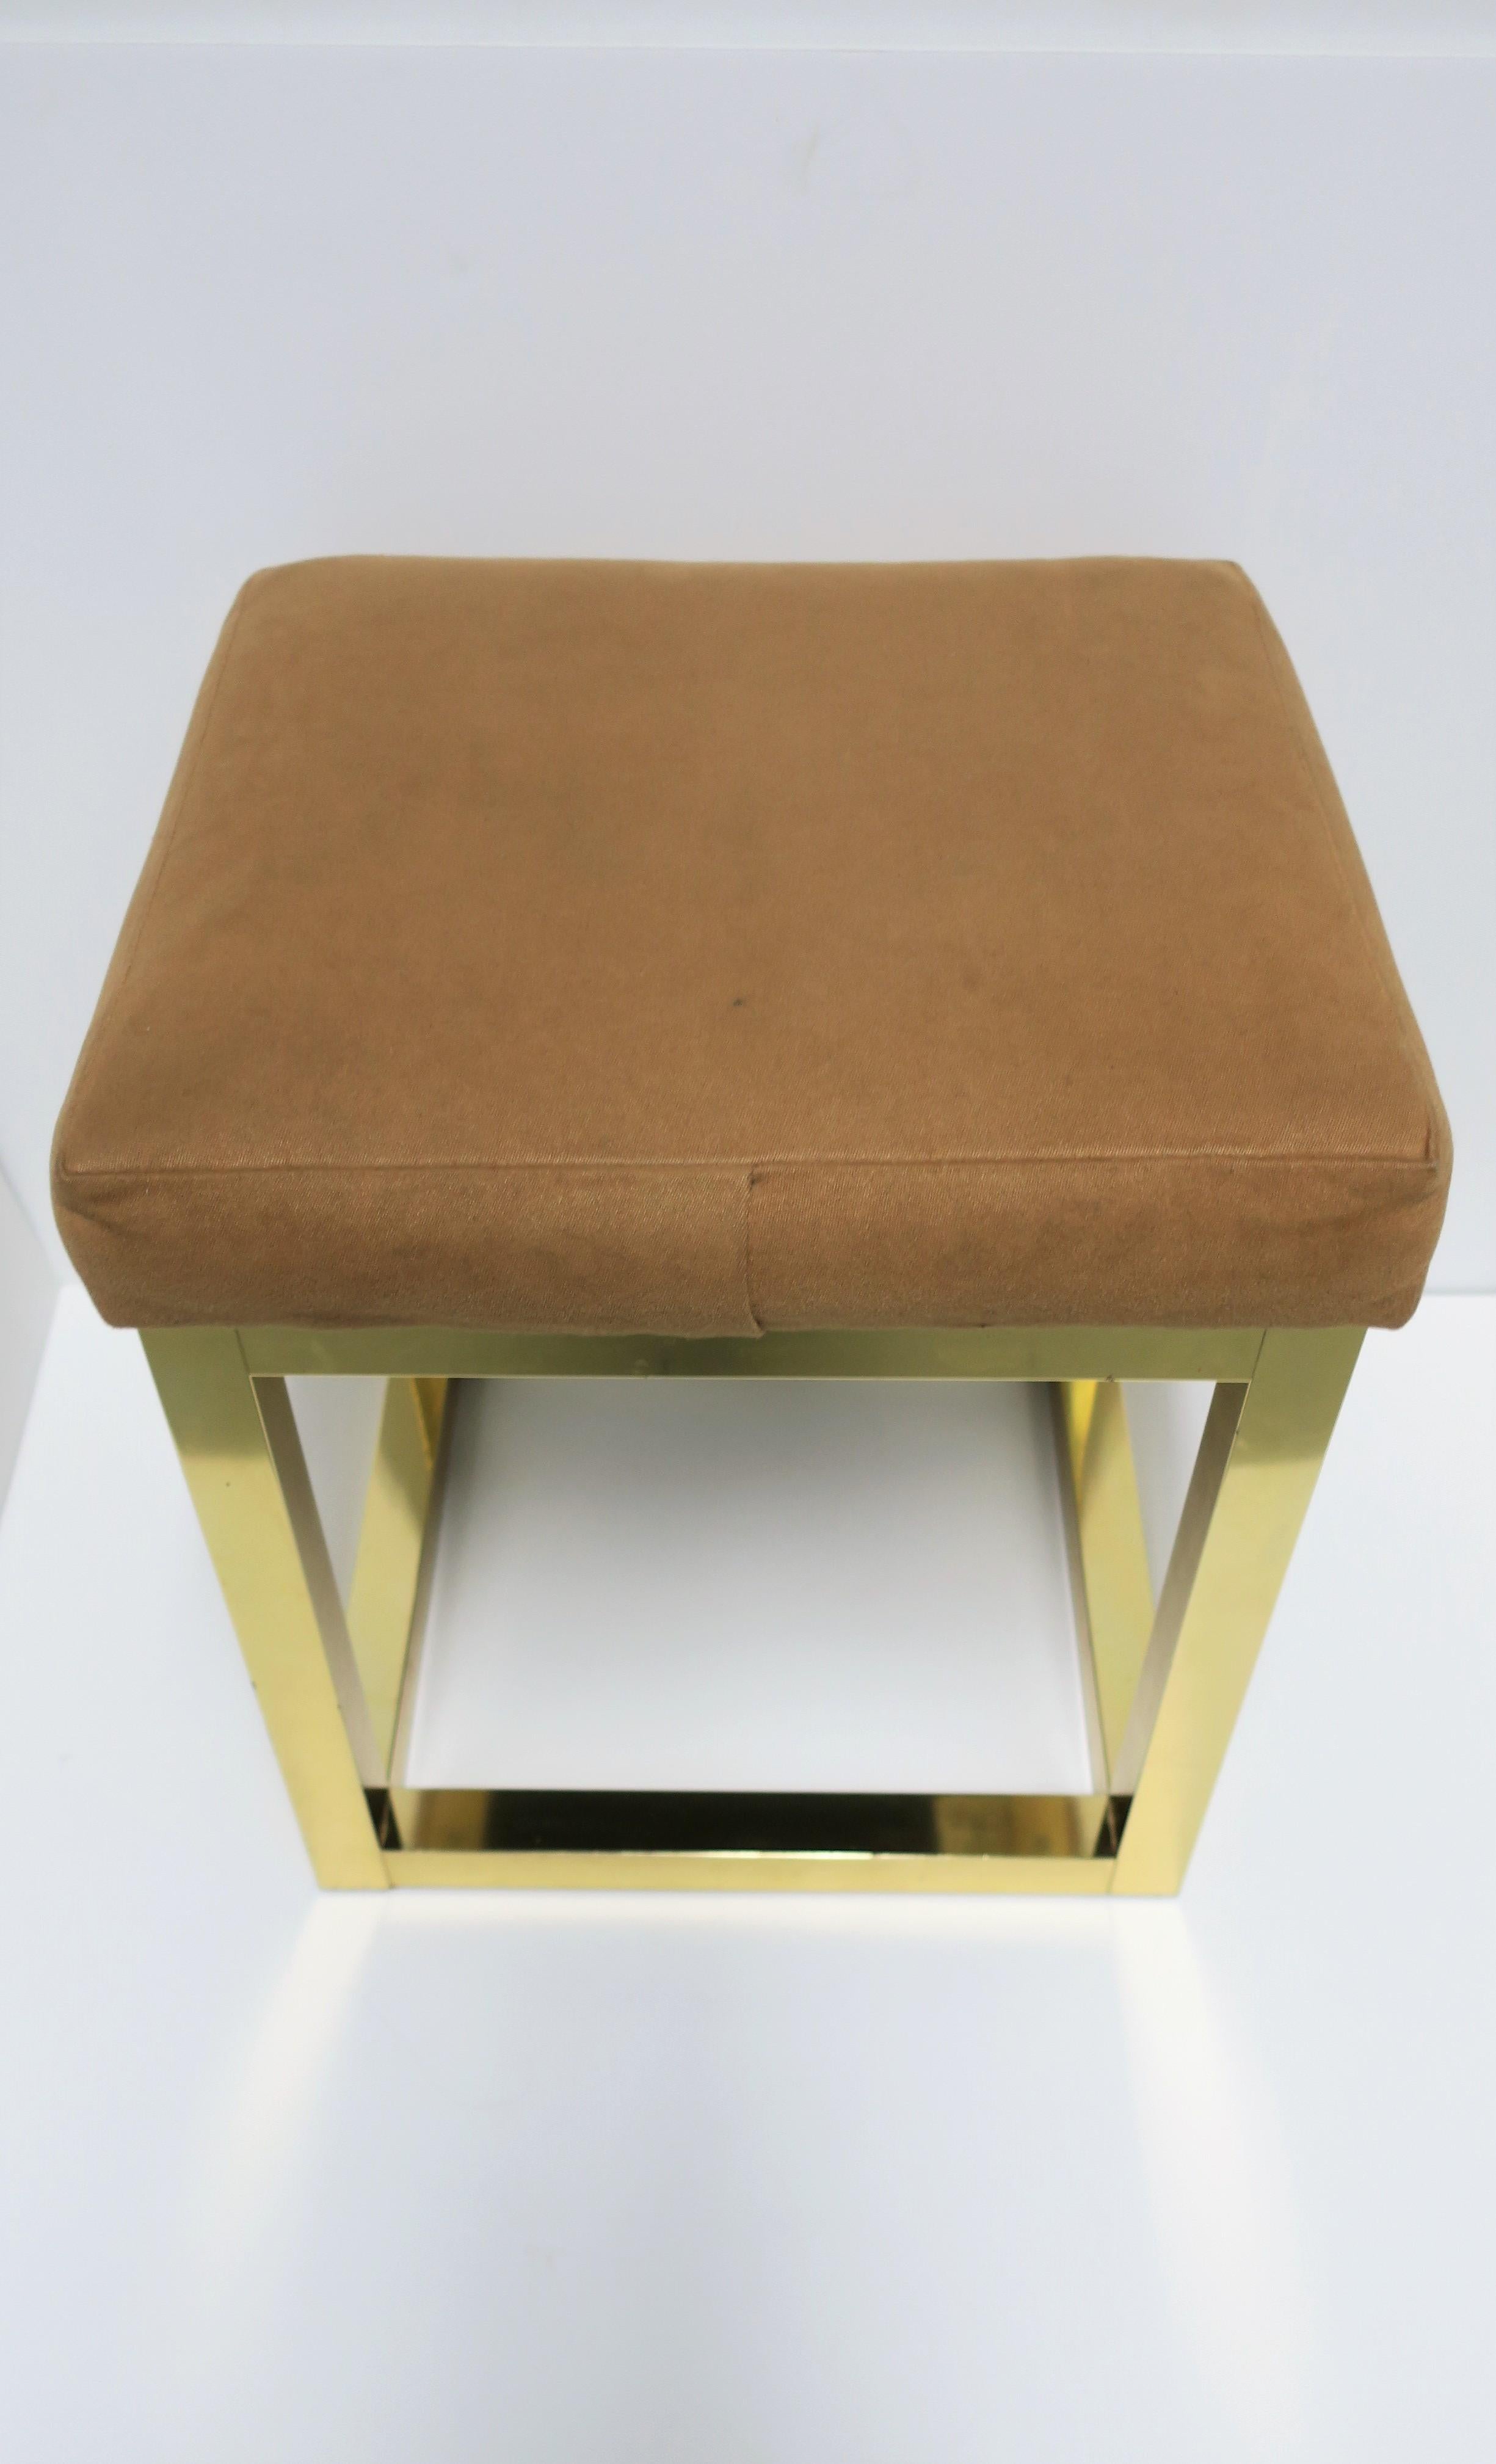 1970s Modern Brass Bench or Stool in the Style of Designer Paul Evans For Sale 5